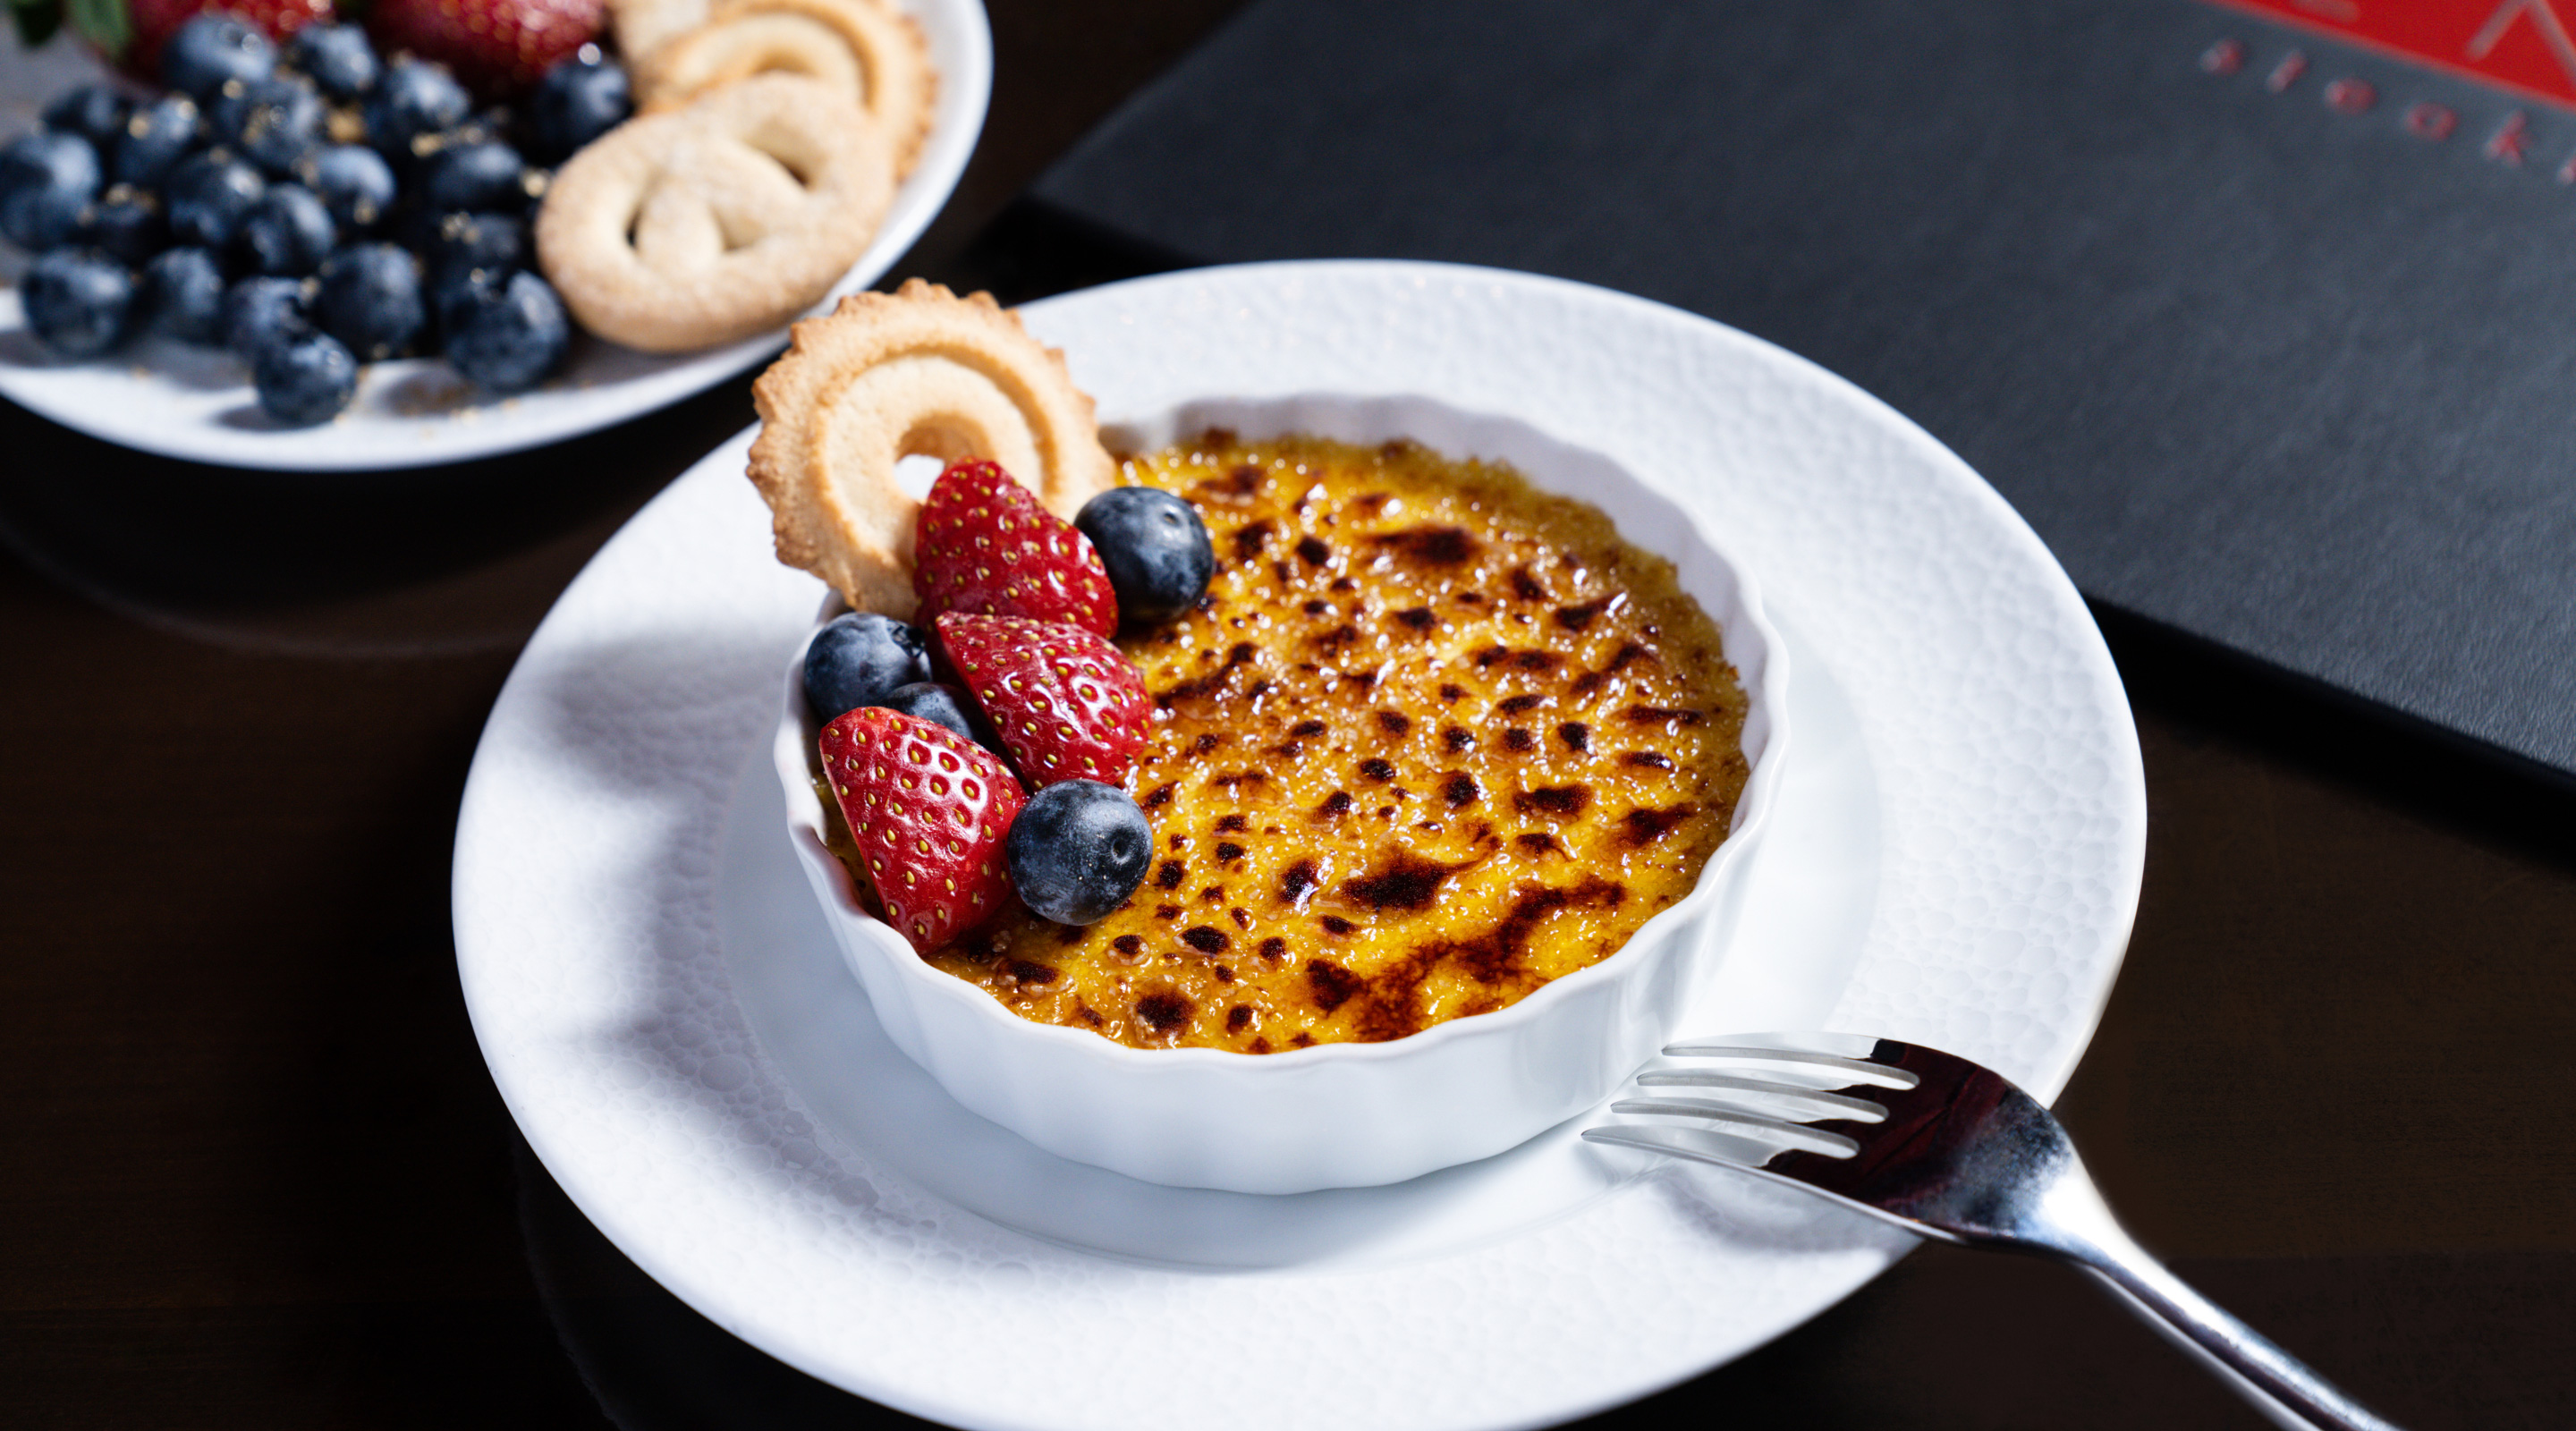 Creme brulee with raspberries and blueberries.